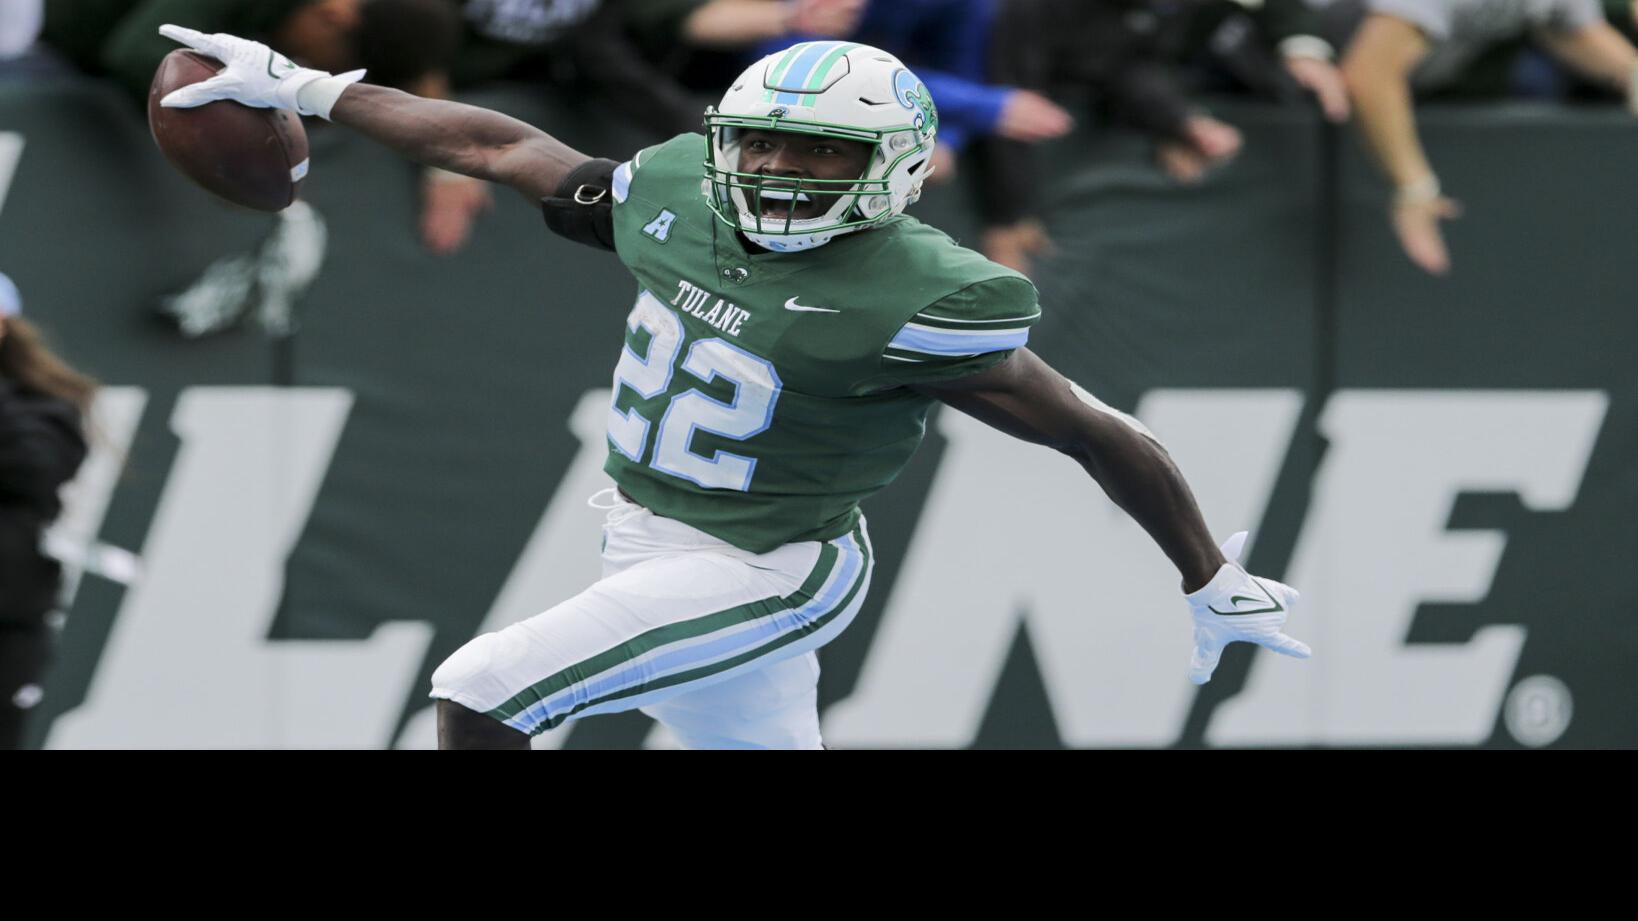 Tulane Alumni - Momentum is high for Tulane Athletics with a new